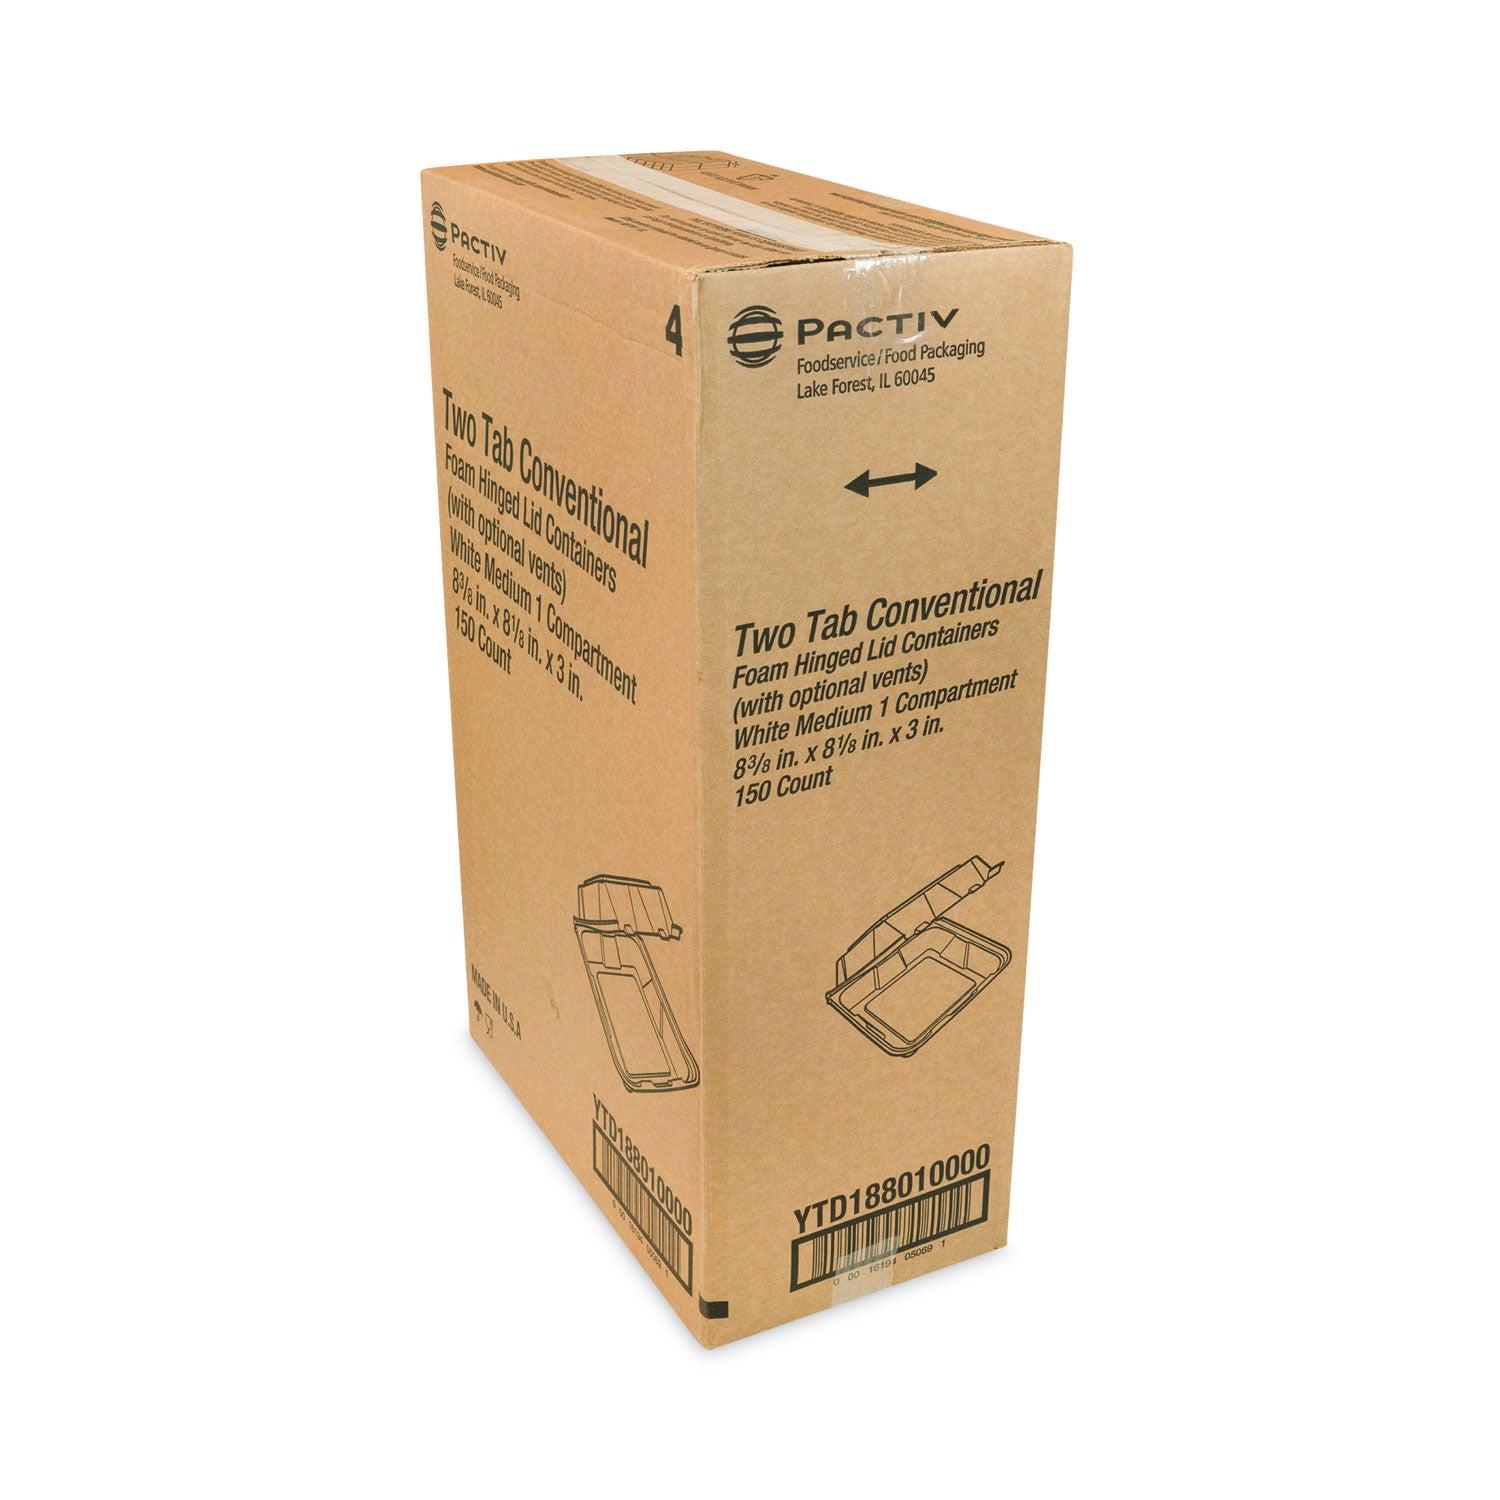 vented-foam-hinged-lid-container-dual-tab-lock-842-x-815-x-3-white-150-carton_pctytd188010000 - 3